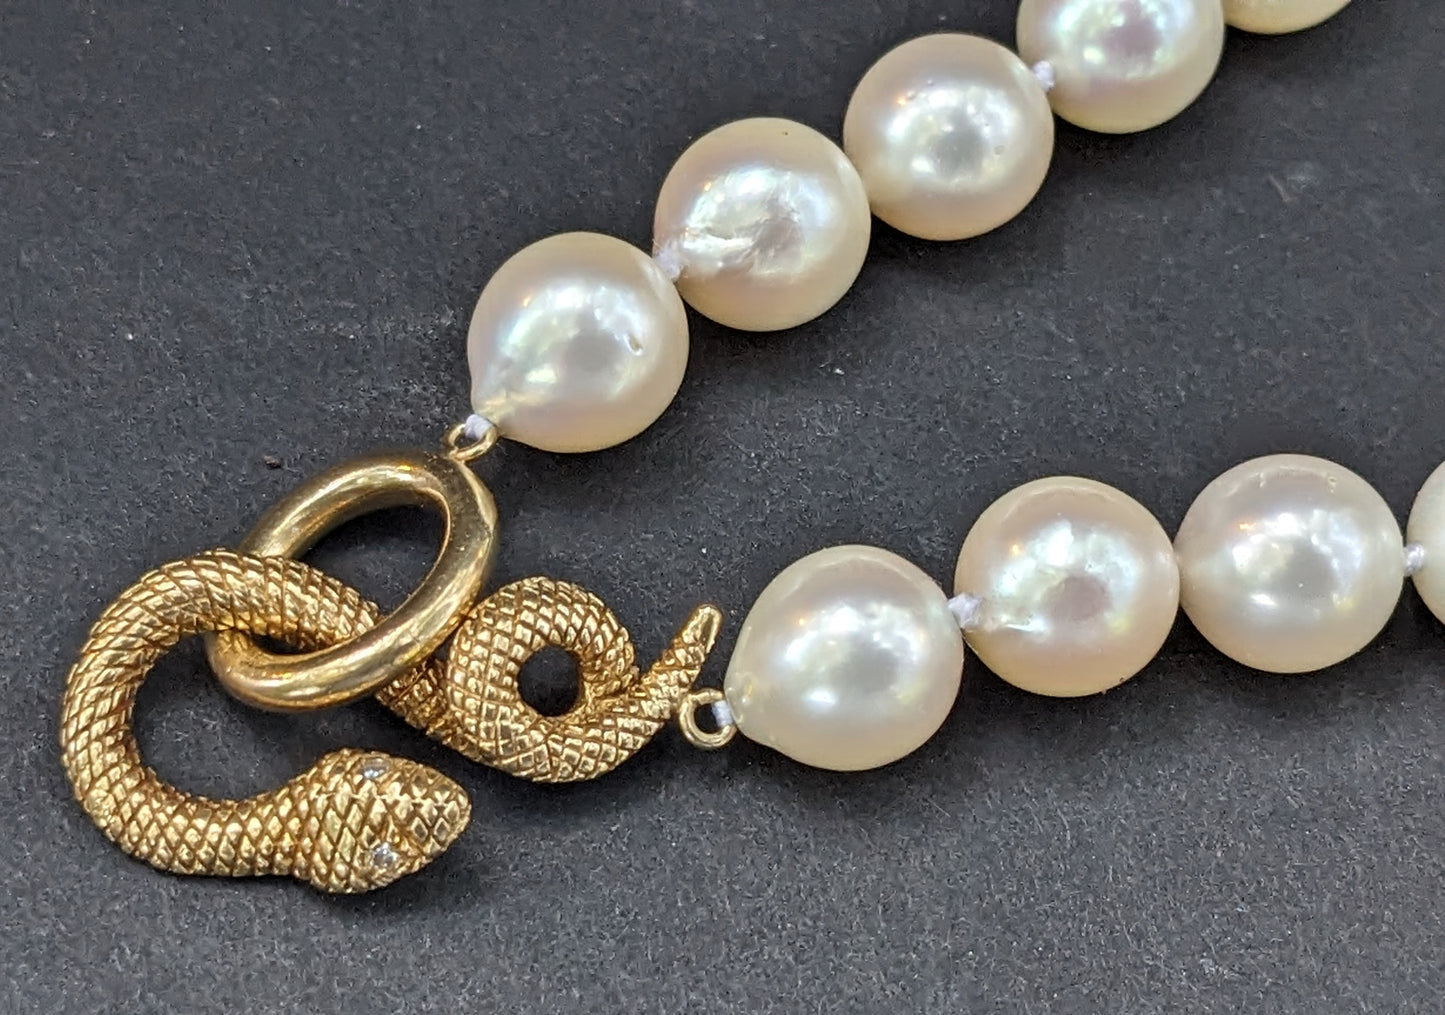 14k Gold, Diamond, and Pearl Necklace